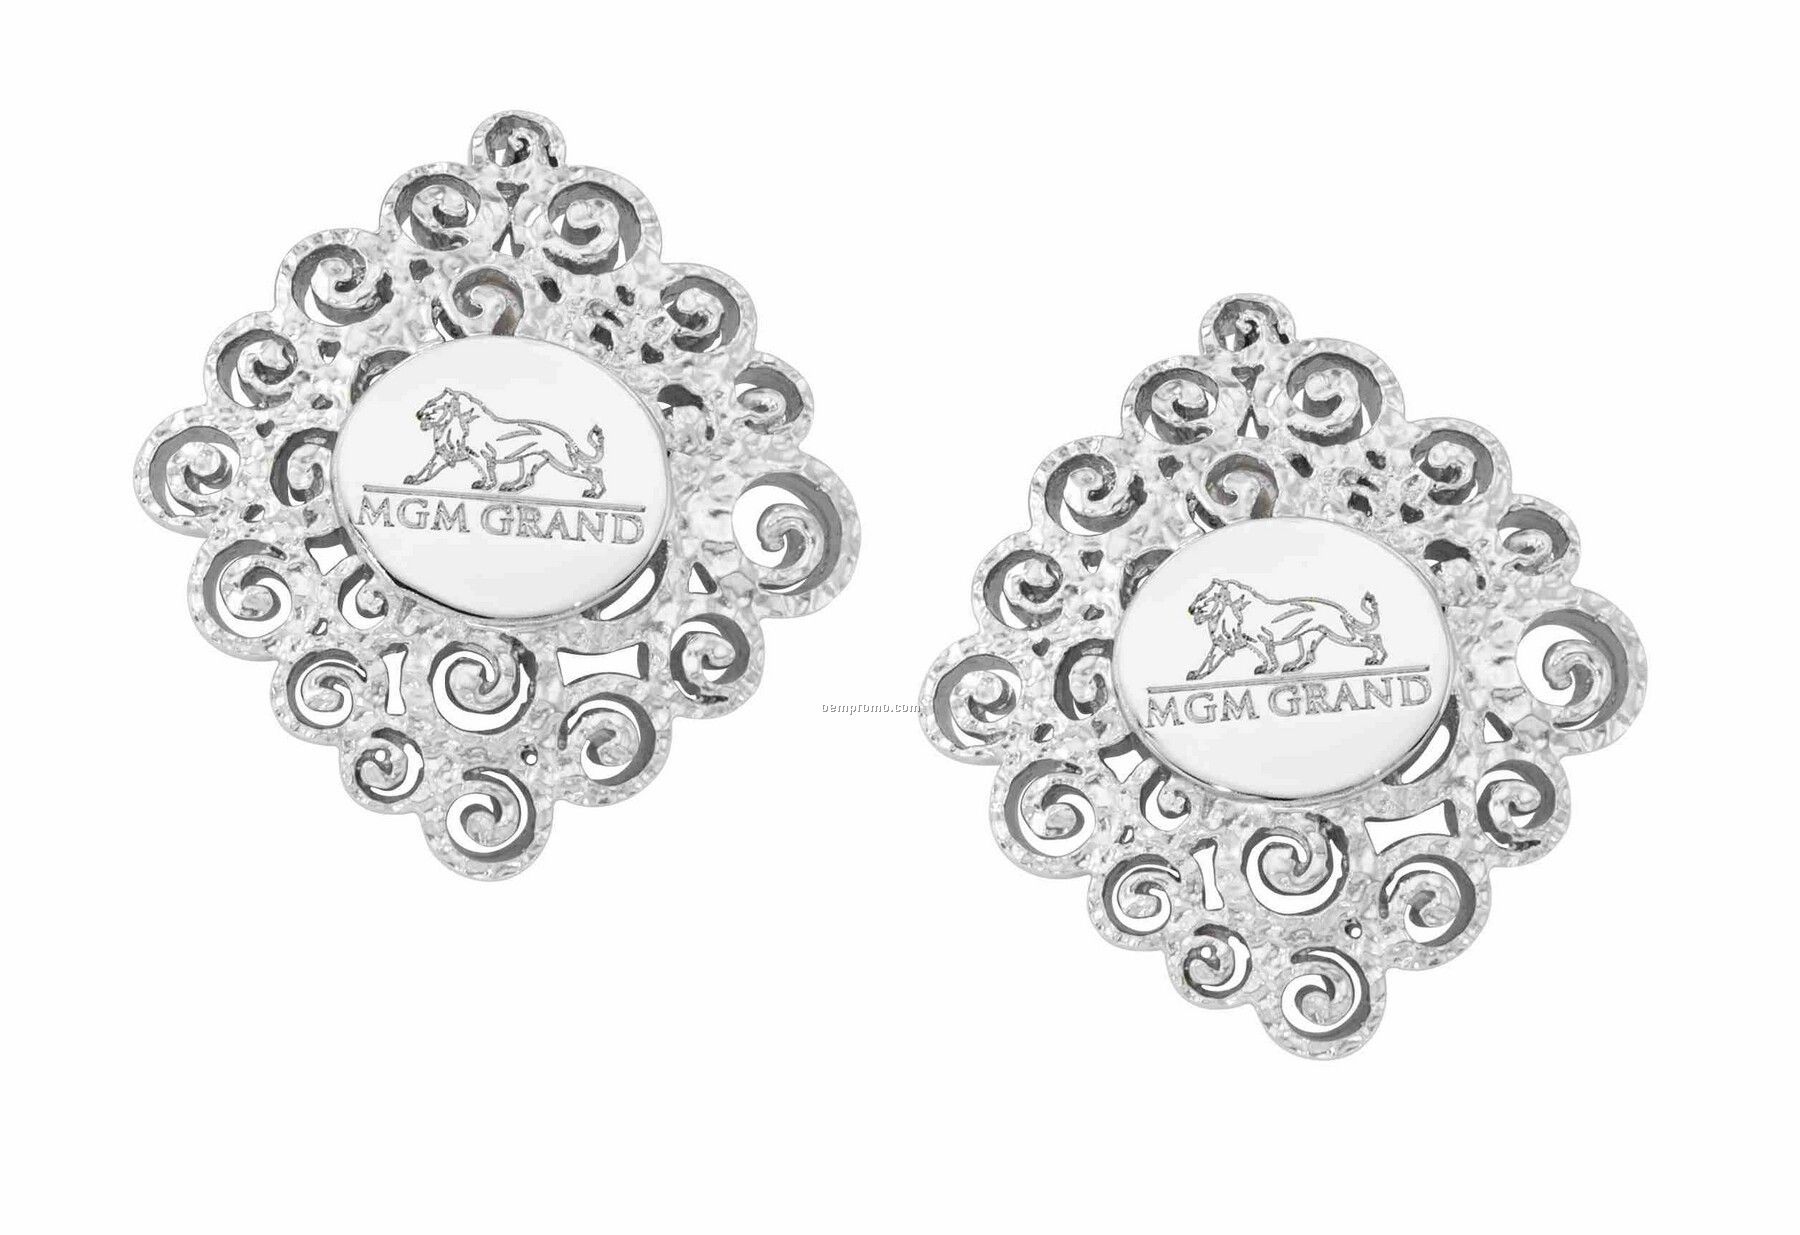 Ovations - Grandeur Silver Plated Earrings - Oval Area For Laser Engraving